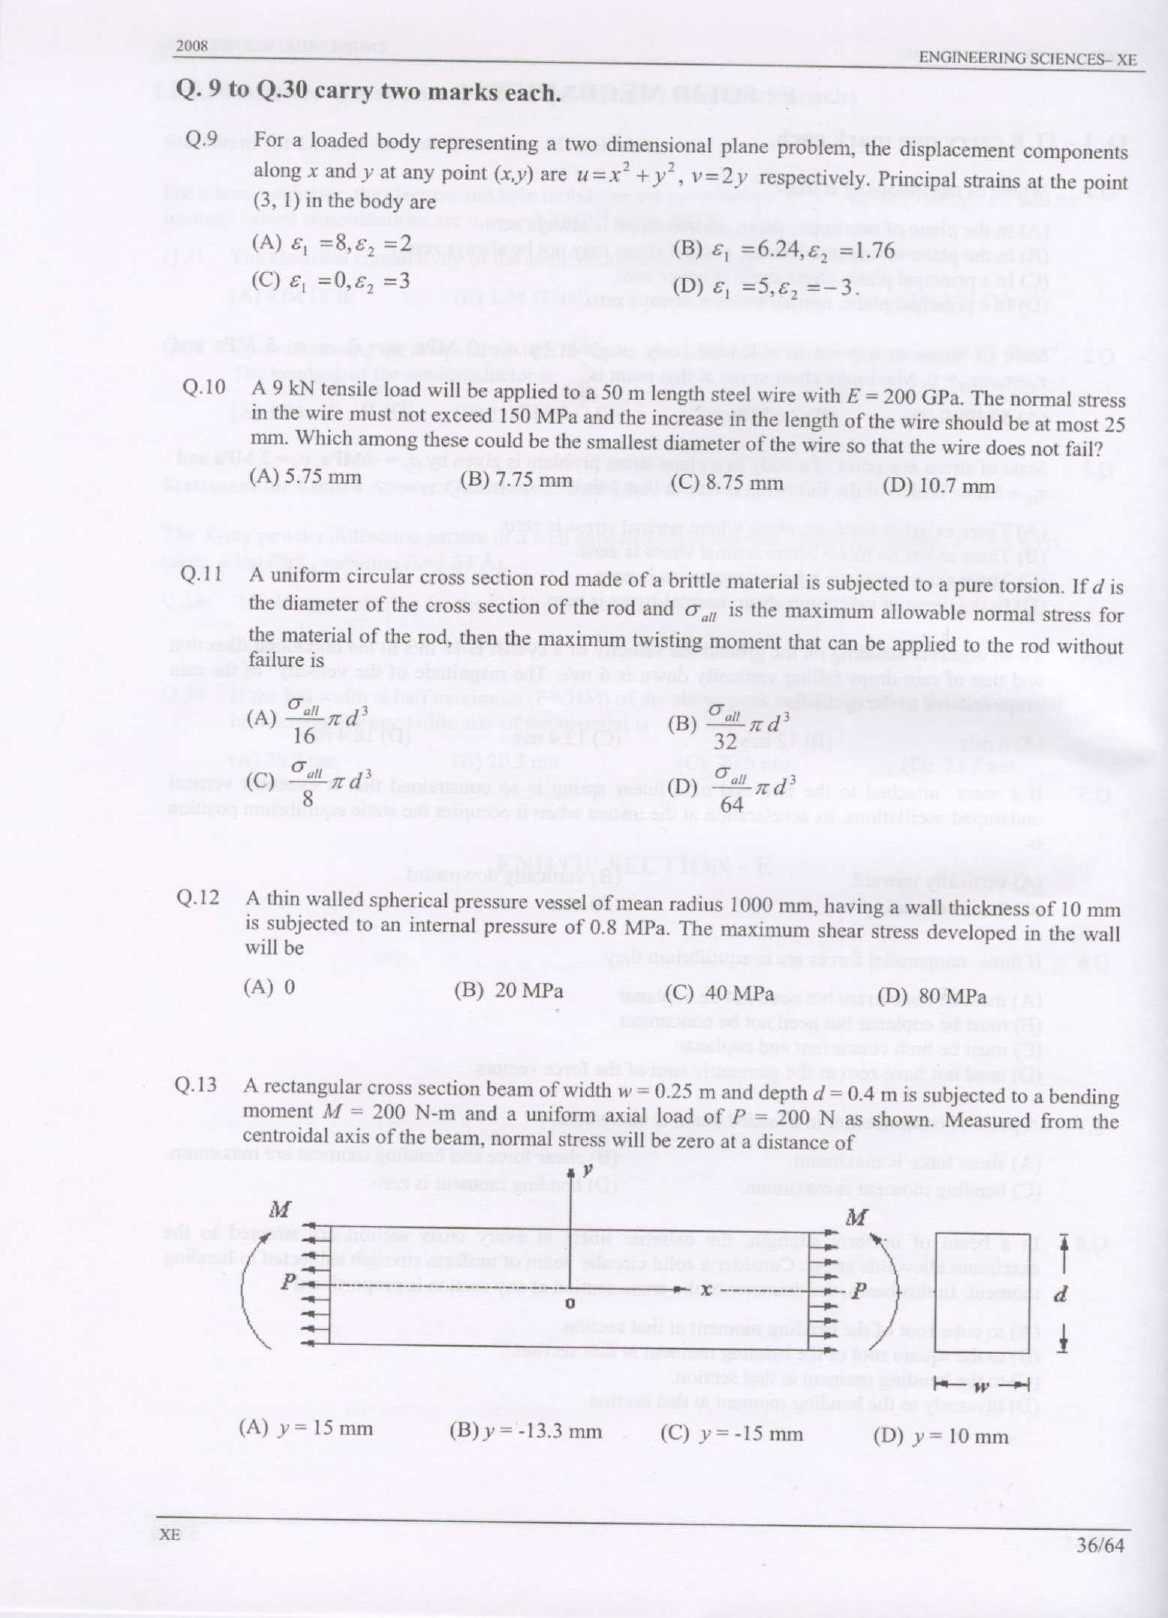 GATE Exam Question Paper 2008 Engineering Sciences 36